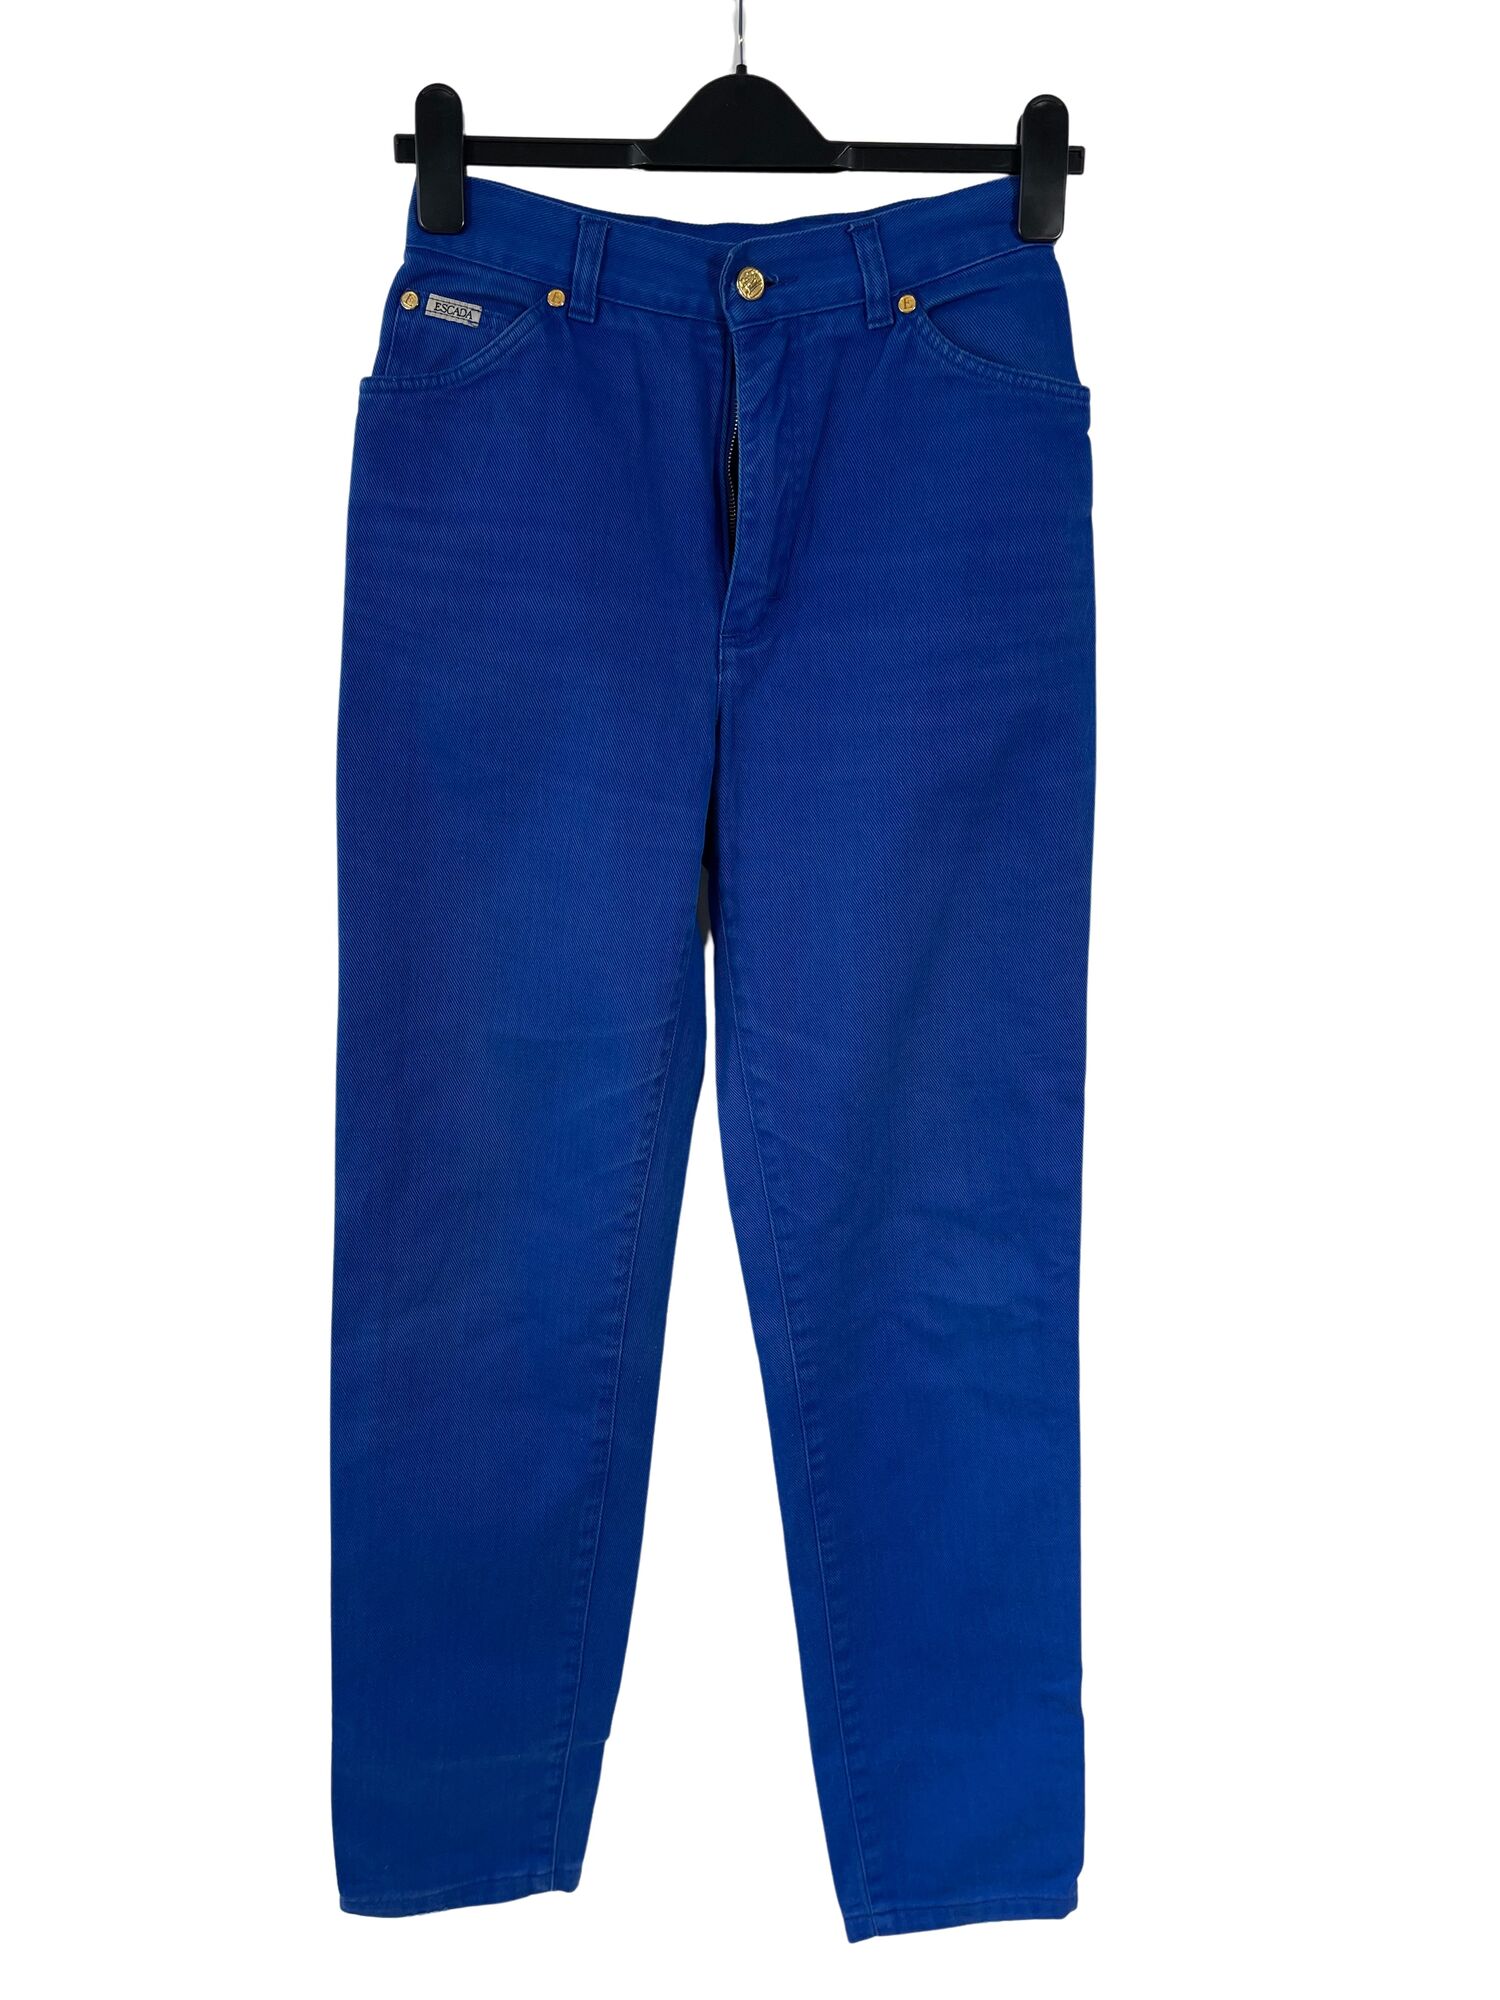 Electric blue jeans Escada - 36, buy pre-owned at 40 EUR